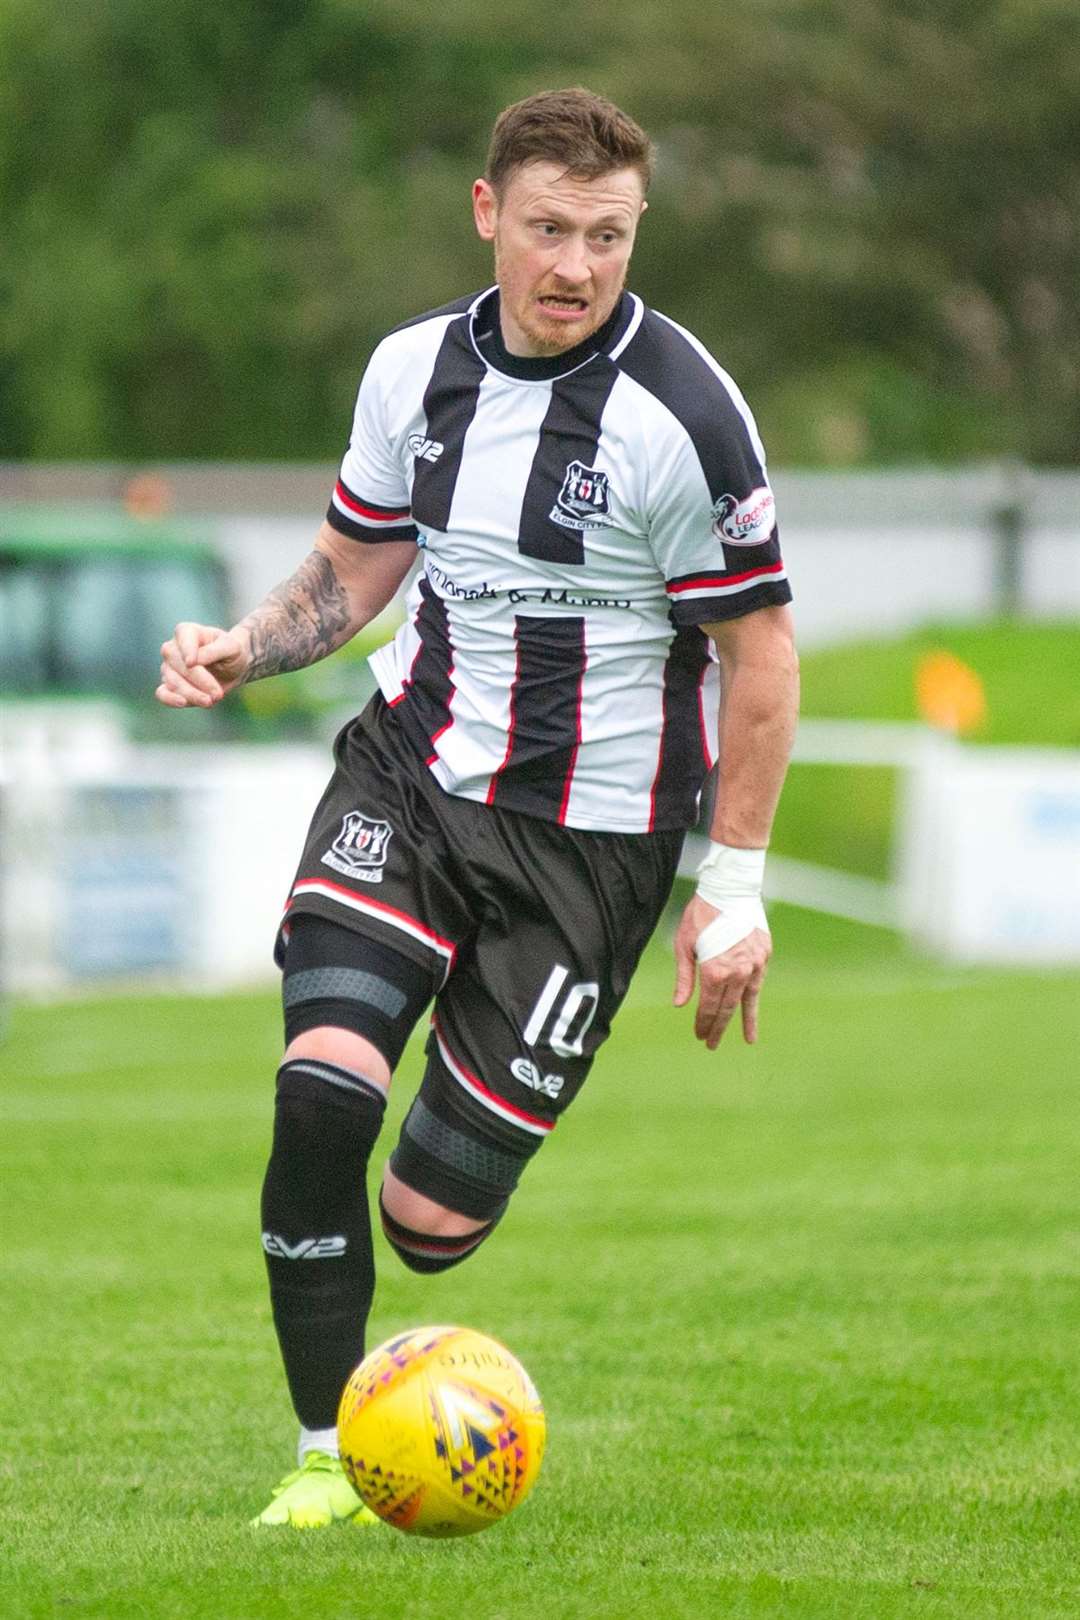 Elgin City's Shane Sutherland...125th Anniversary match between Elgin City FC (8) and an Aberdeen XI (1) - Borough Briggs, Elgin - 4th July 2019...Picture: Daniel Forsyth. Image No.044377.